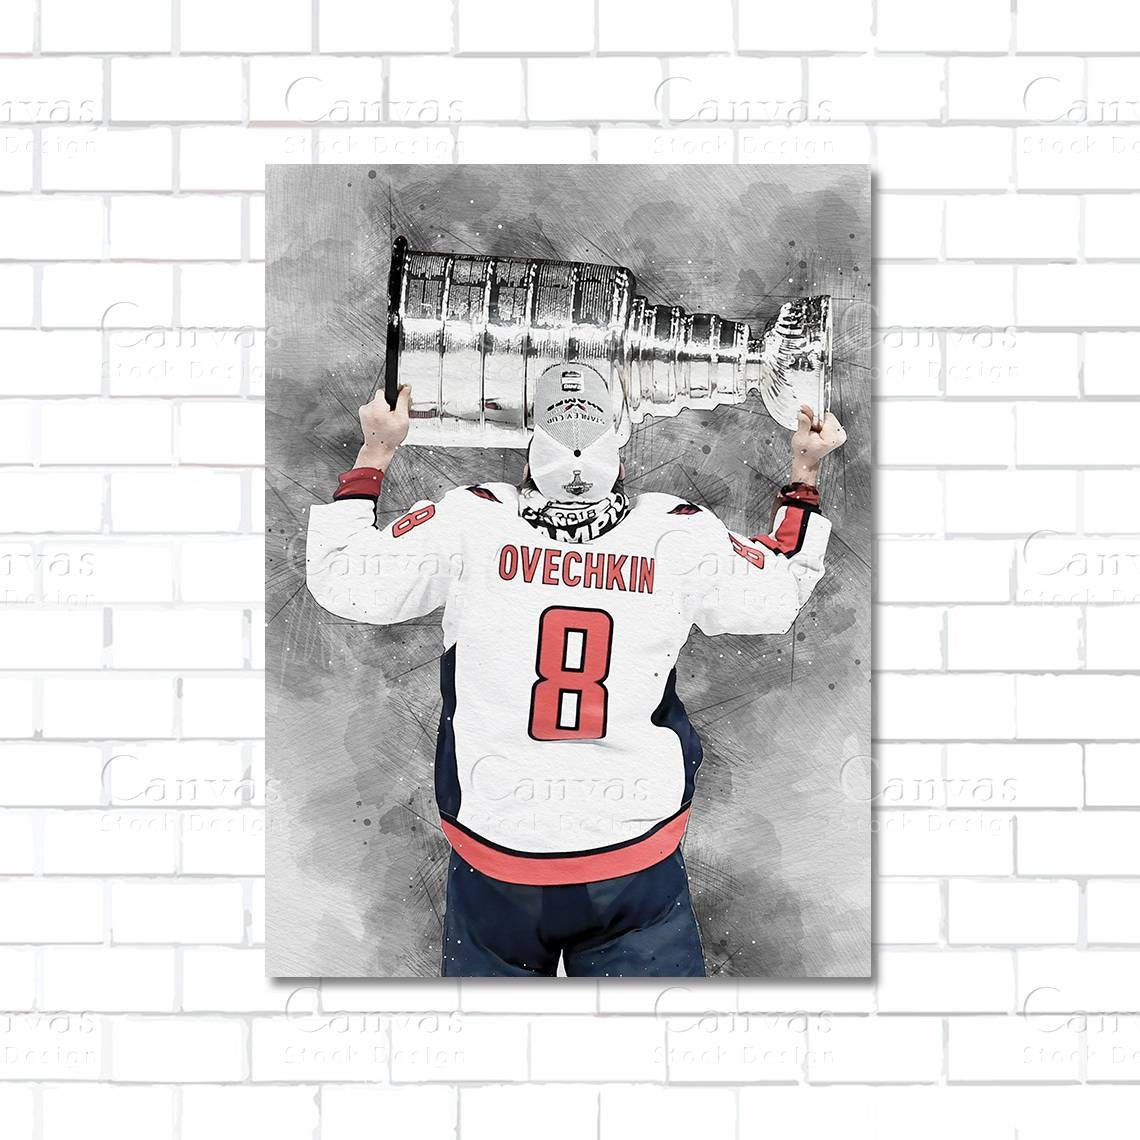 Wall Alex Canvas Hockey Gift for Wall Frame, Him Etsy Man Cave Art Capitals Her,sports Fan, - Cup Canvas Decor, Kids Stanley Poster, Ovechkin